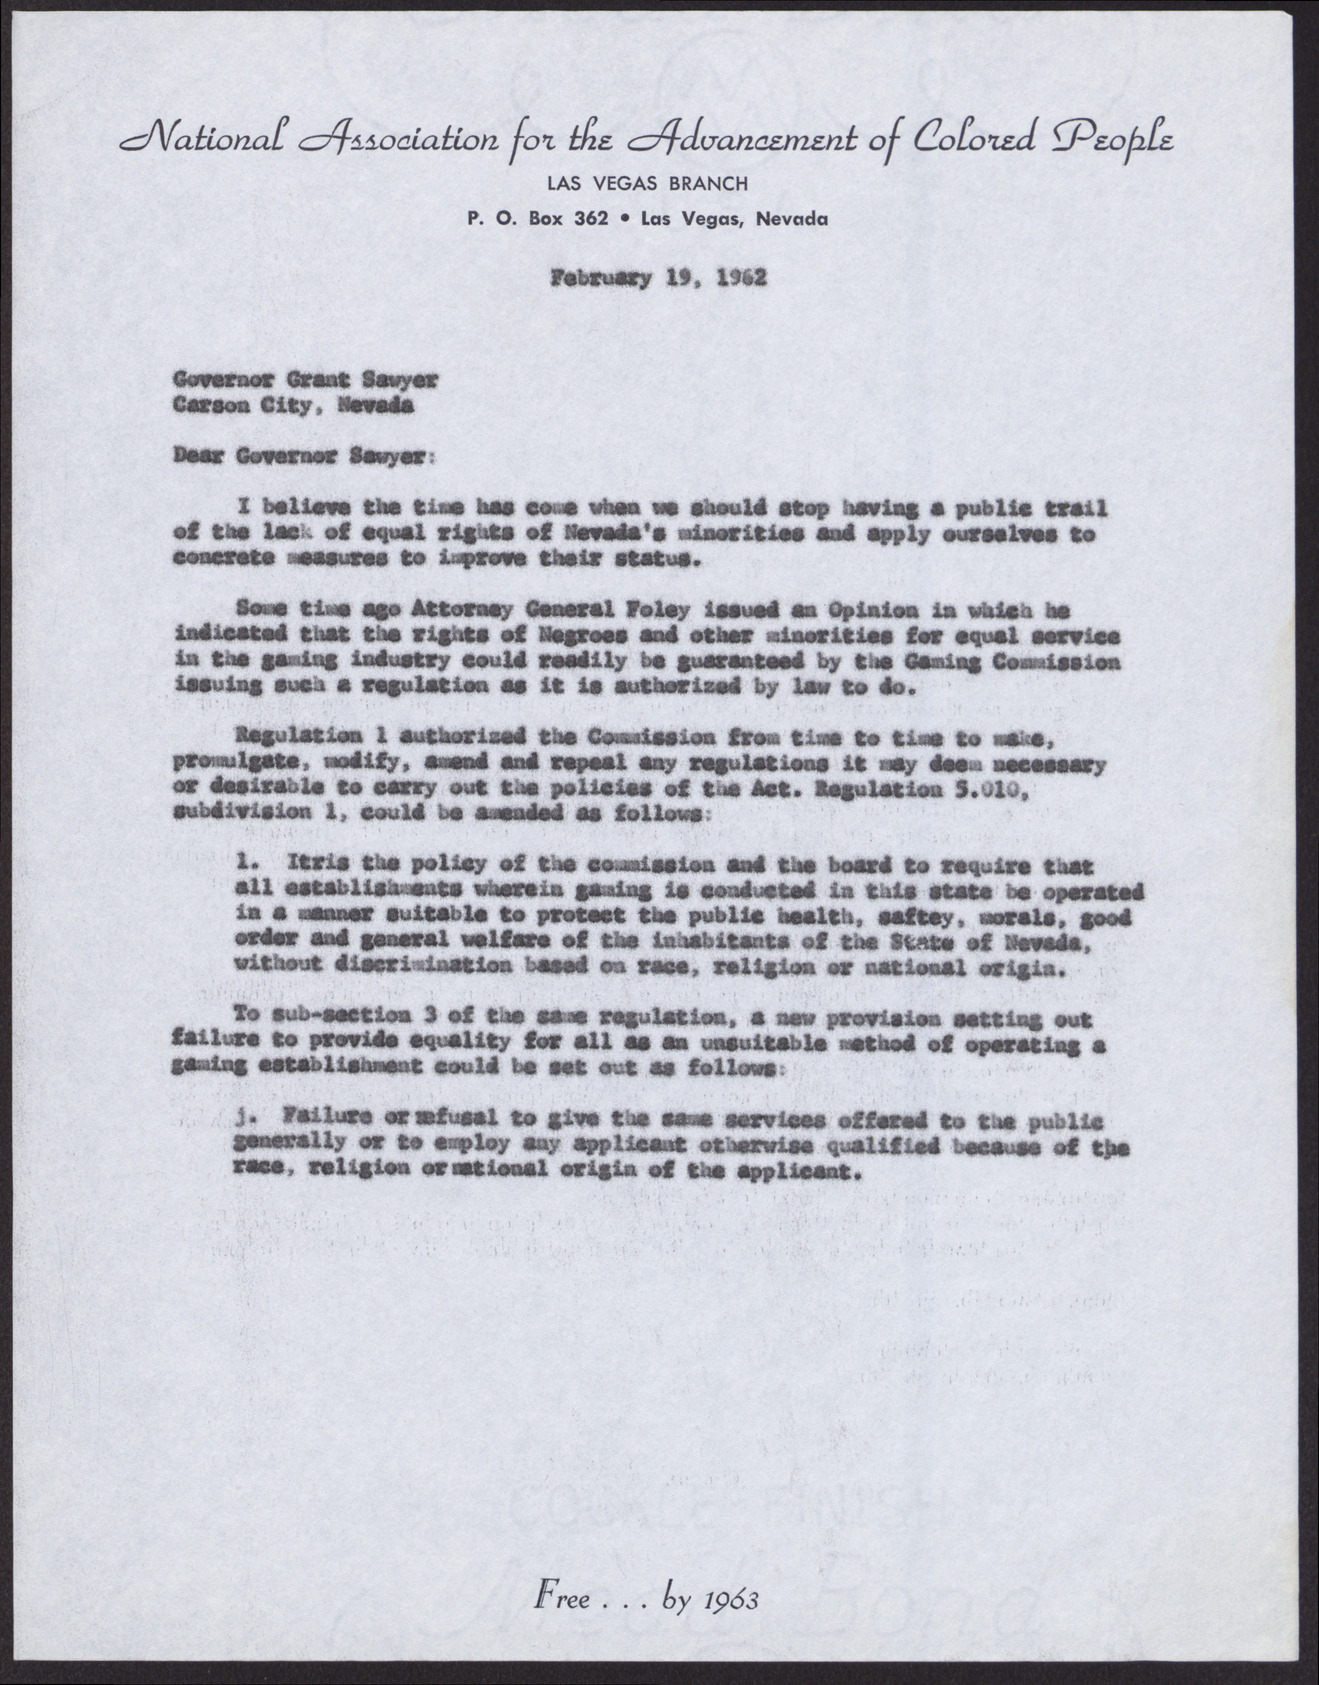 Letter to Grant Sawyer from Rev. Donald M. Clark (2 pages), February 19, 1962